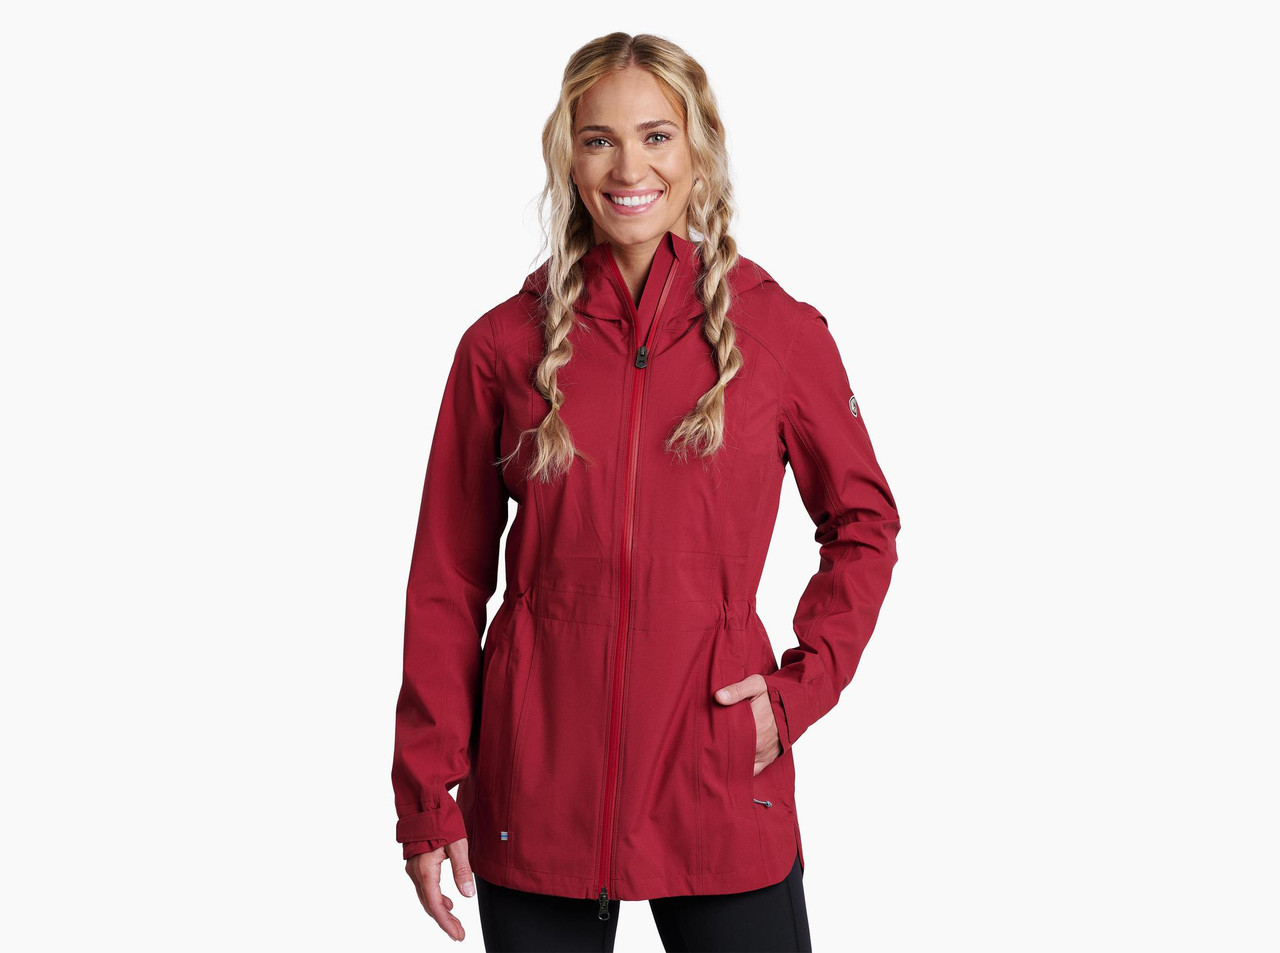 Kuhl Travrse Pullover - Women's Review